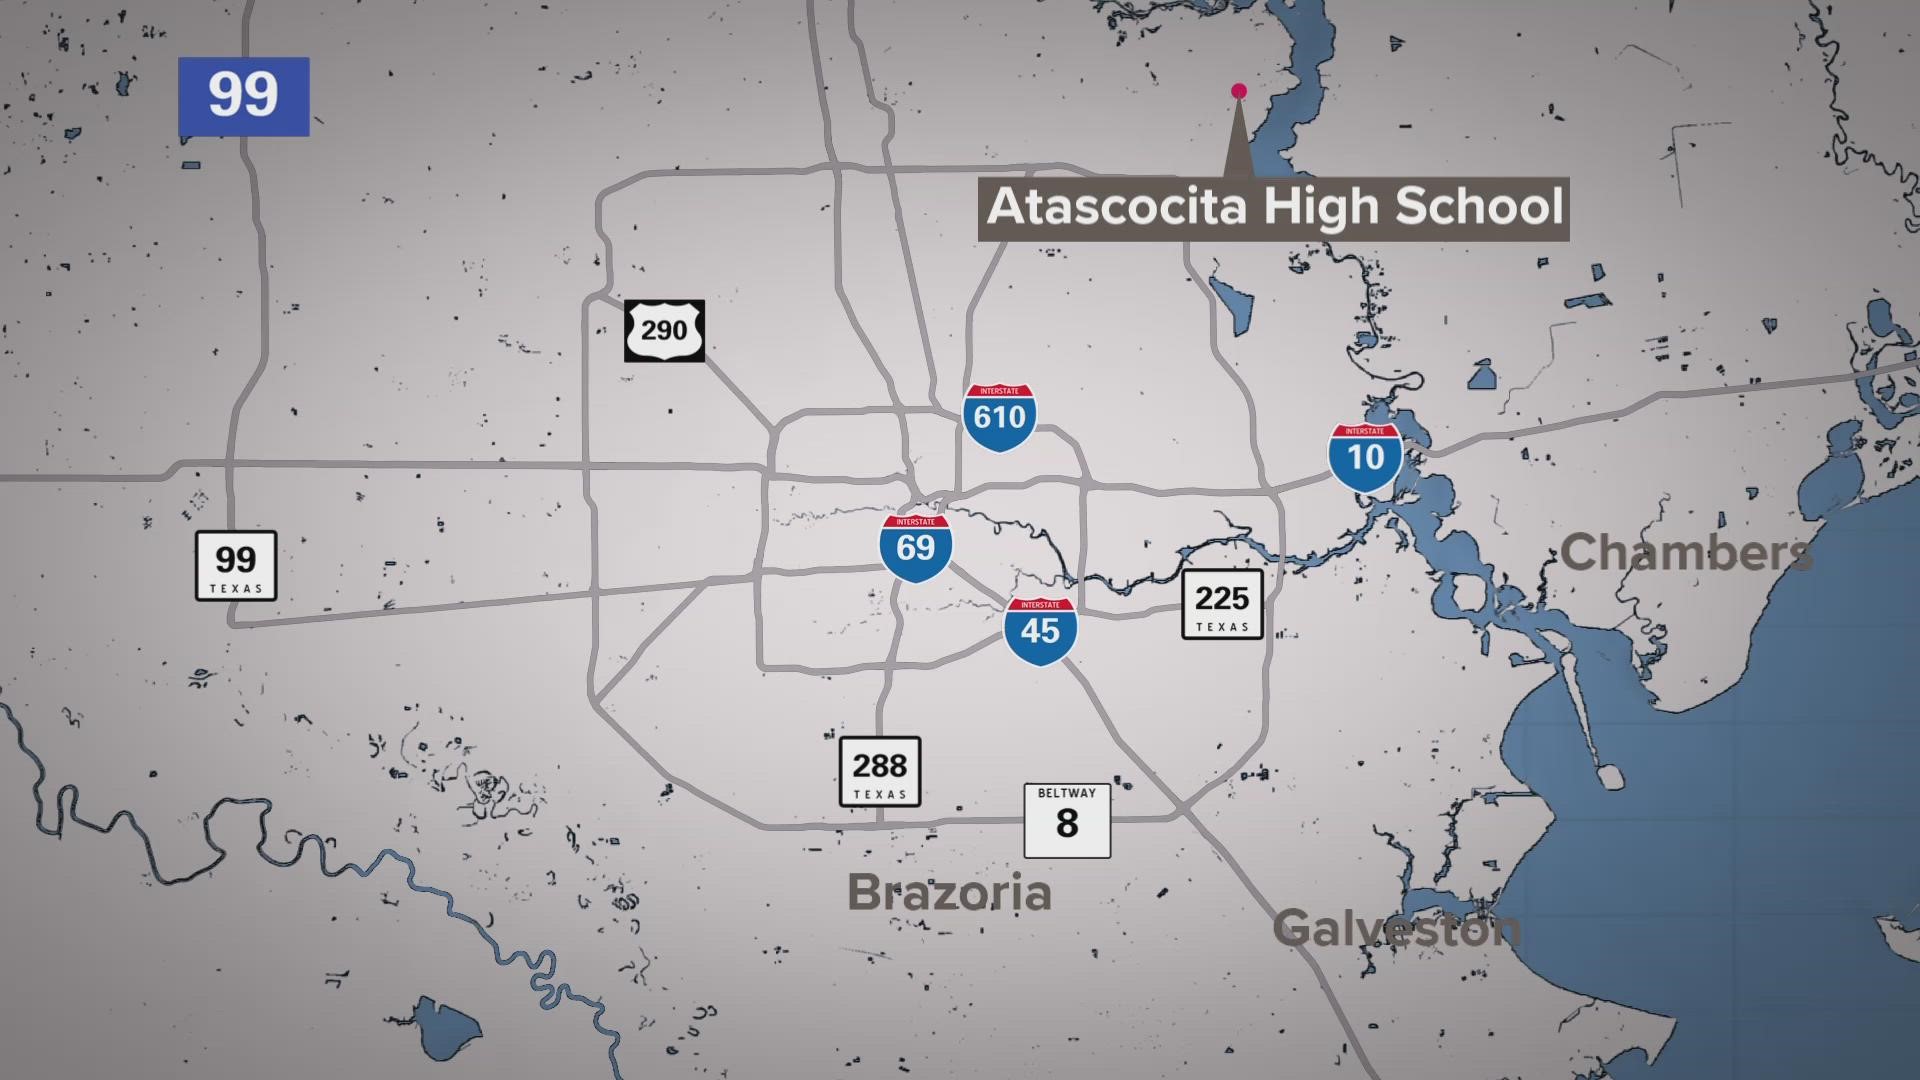 In a letter sent home to parents, Atascocita Principal Will Falker said the first fight happened inside the school and the second took place just outside.